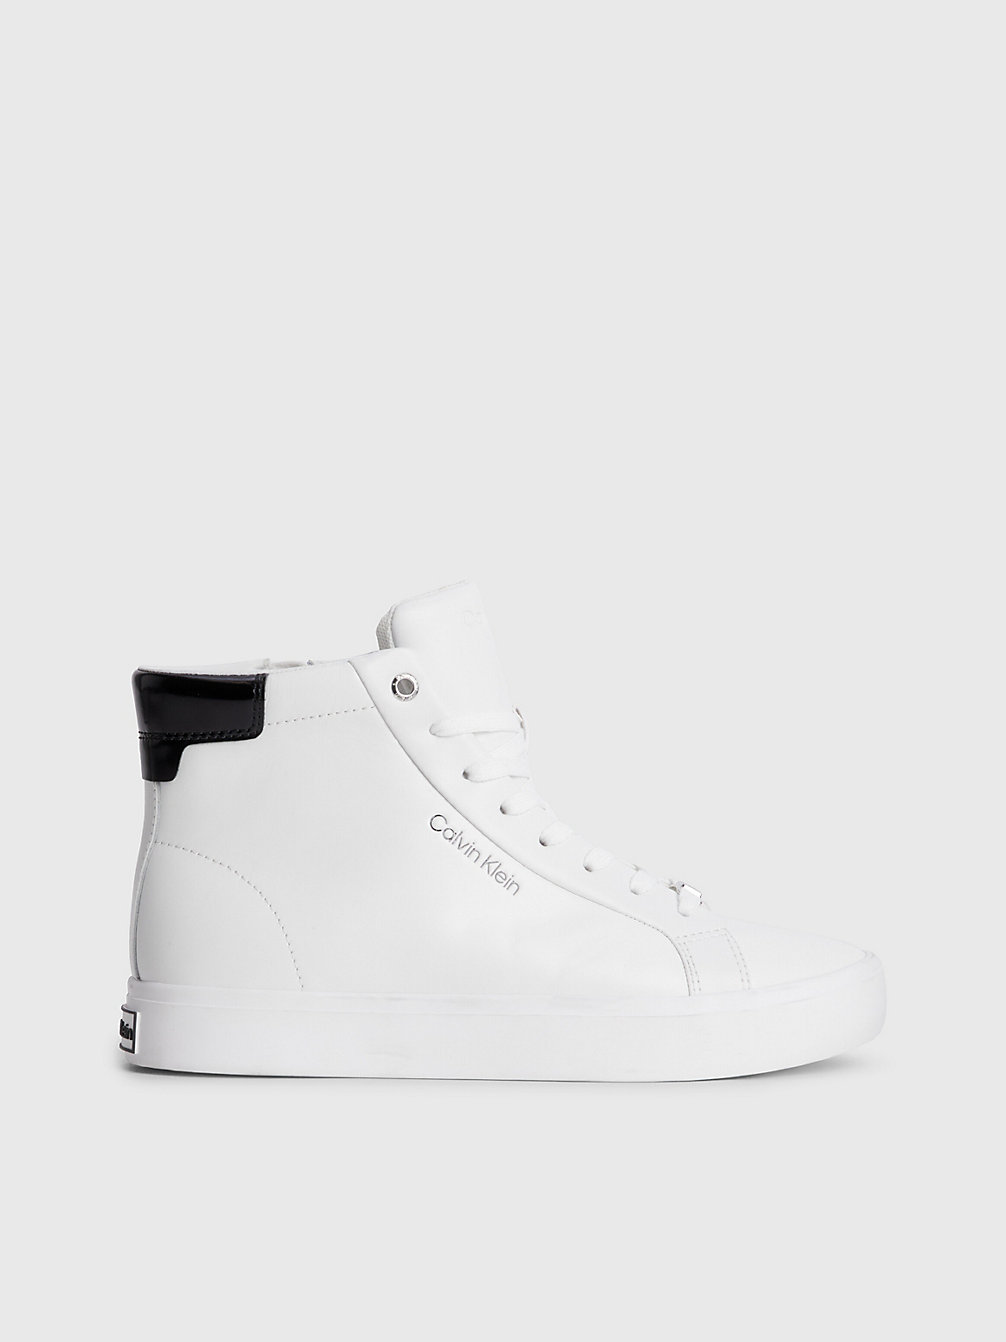 WHITE/BLACK Leather High-Top Trainers undefined women Calvin Klein